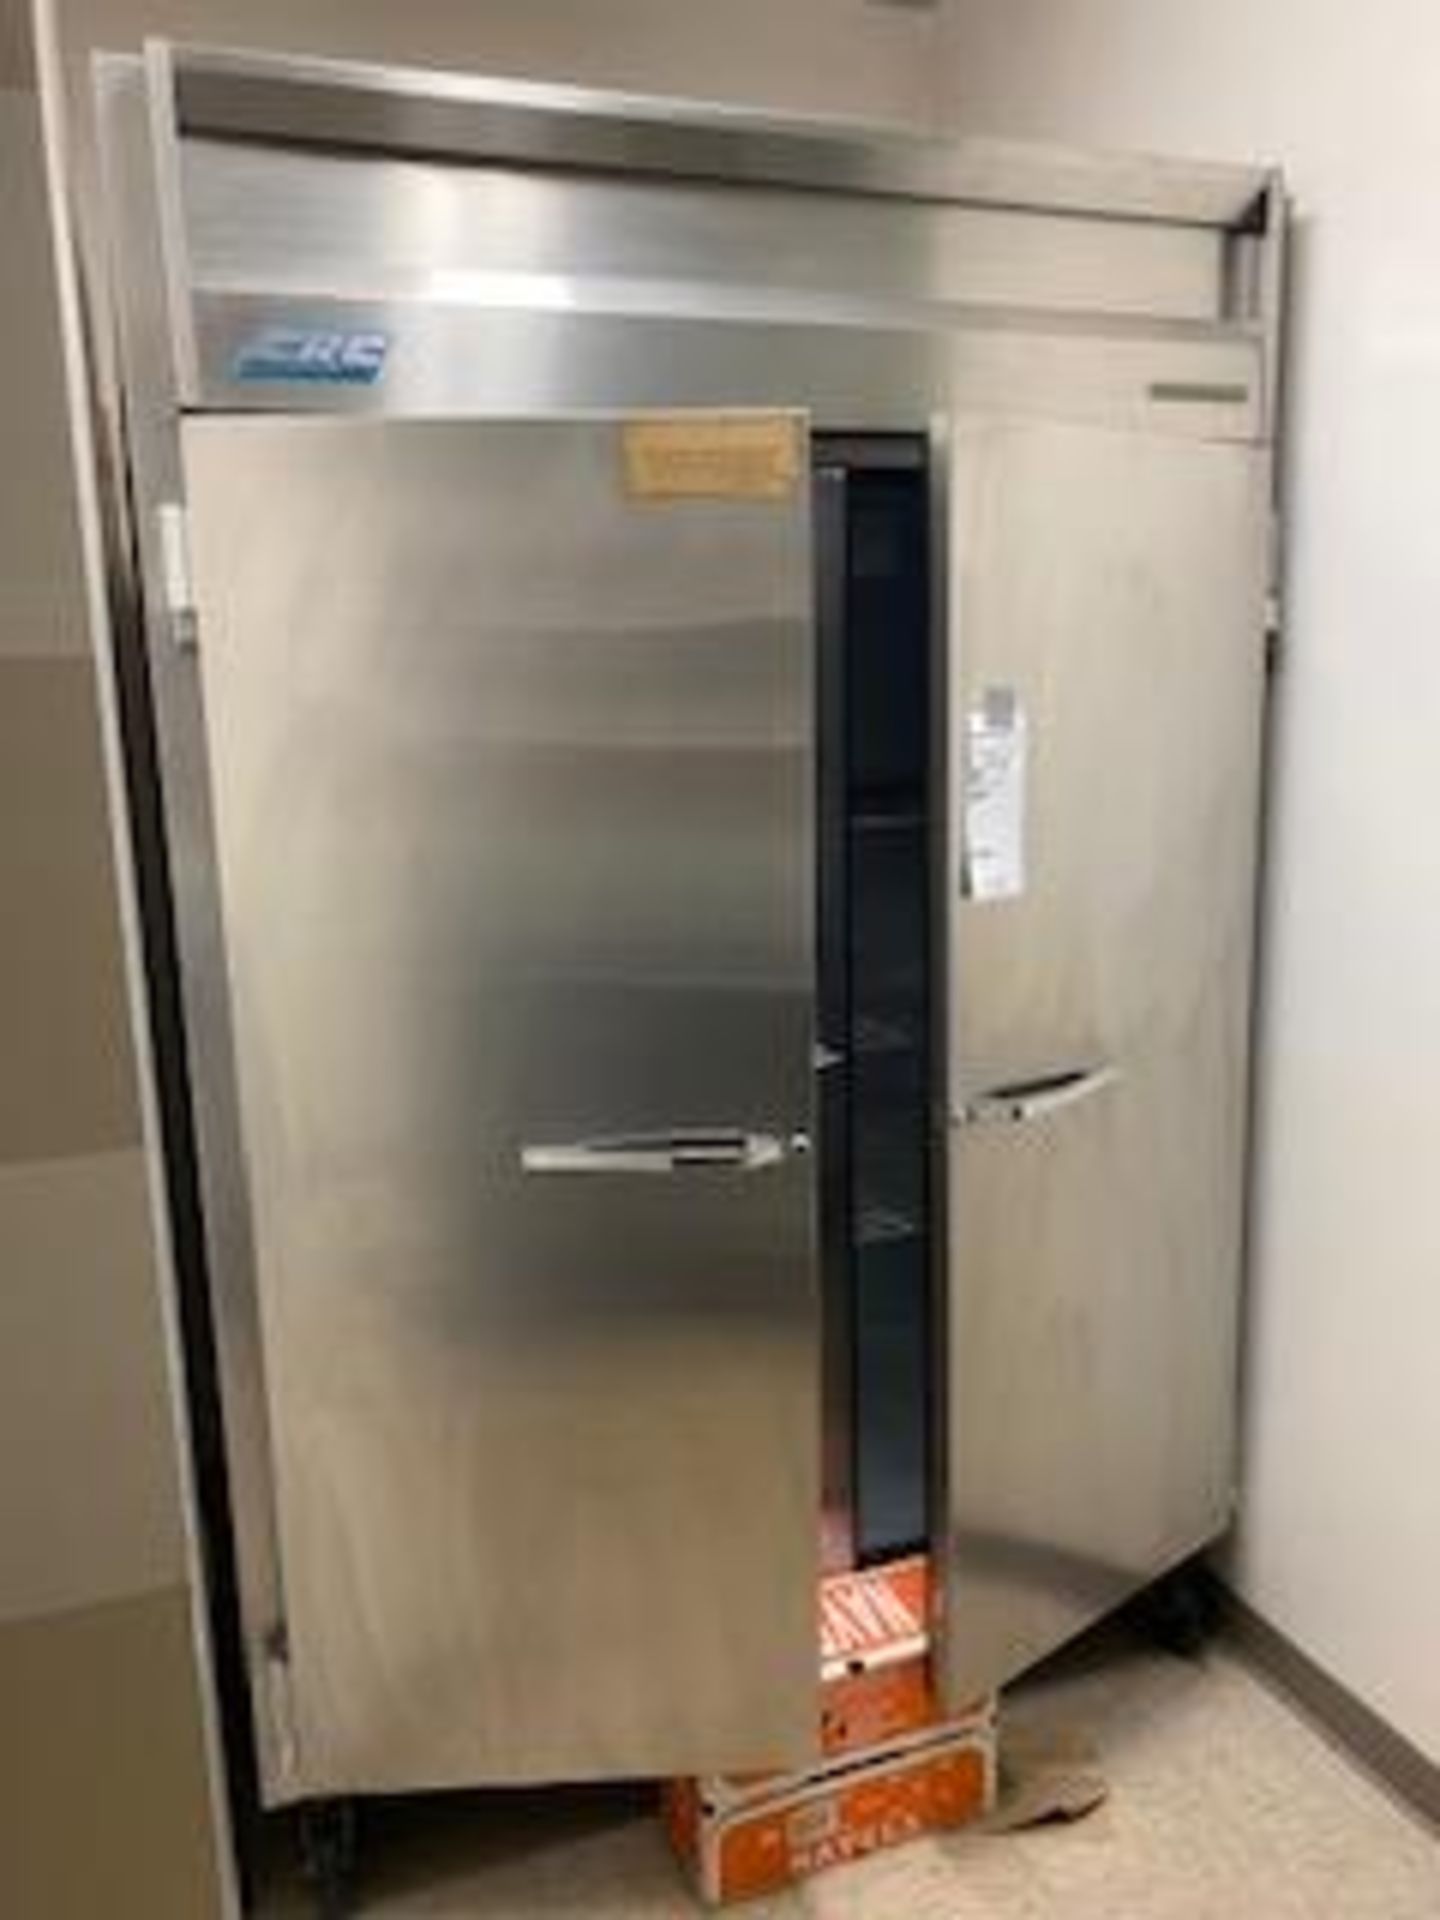 VRC commander double door all stainless refrigerator on wheels 5' wide